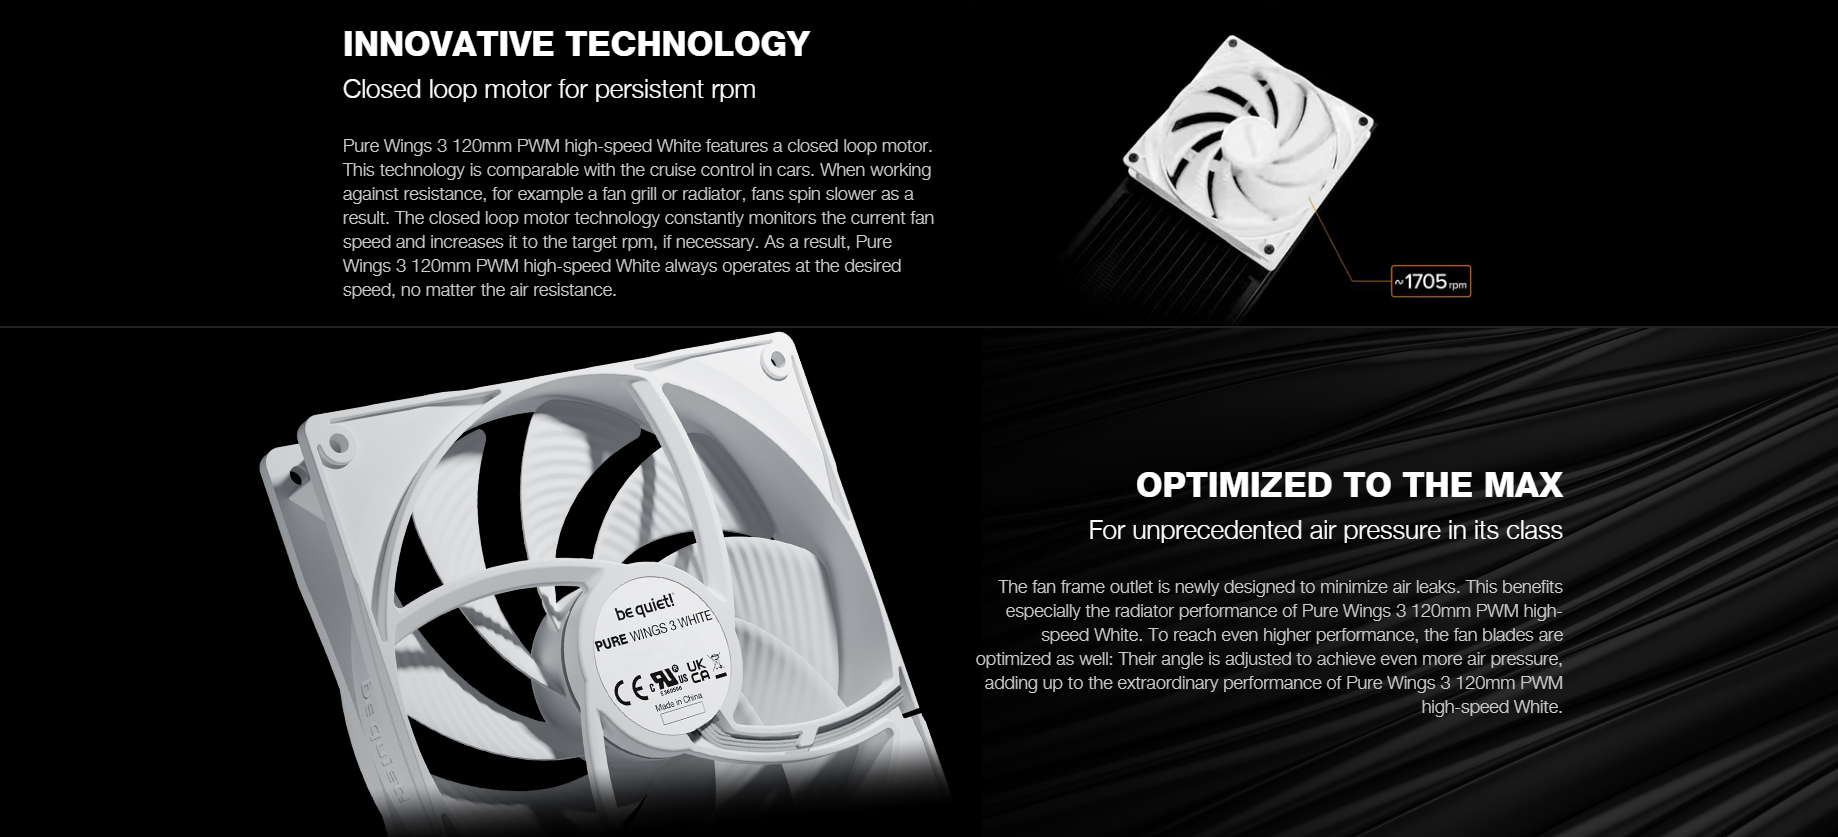 A large marketing image providing additional information about the product be quiet! PURE WINGS 3 120mm PWM High-Speed Fan - White - Additional alt info not provided